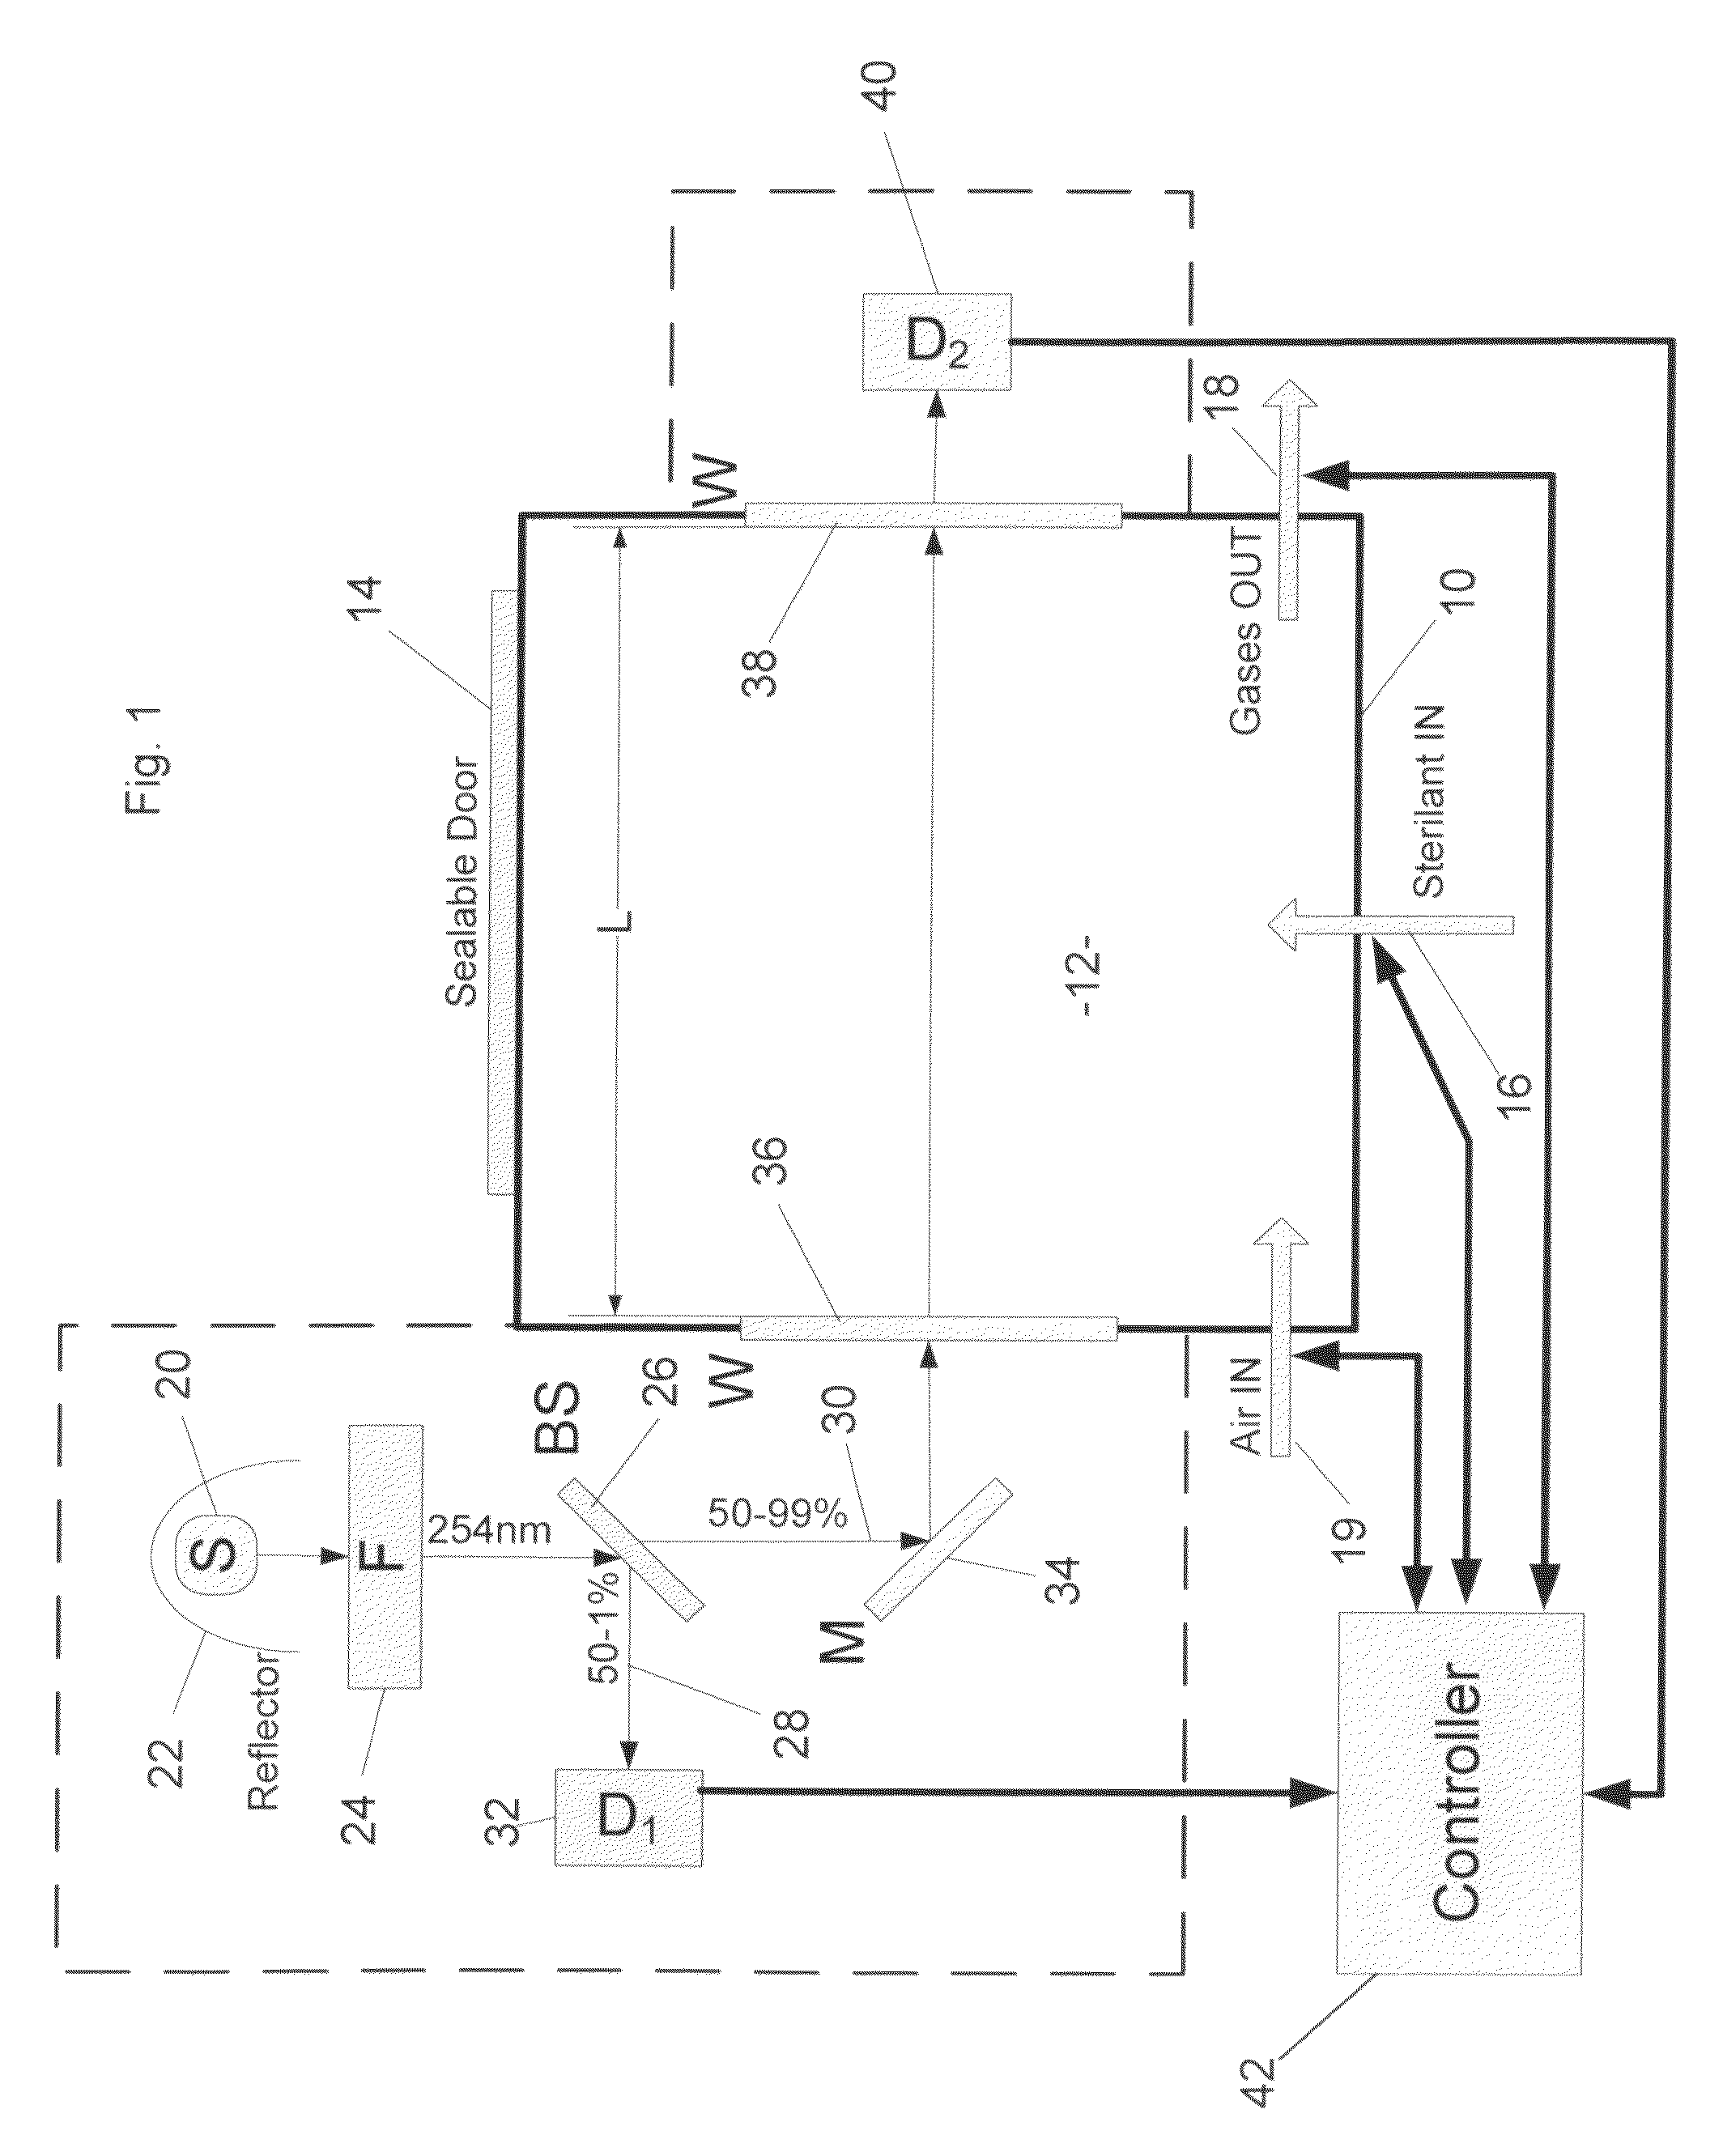 Apparatus and method for measuring the concentration of gases in a sterilization chamber